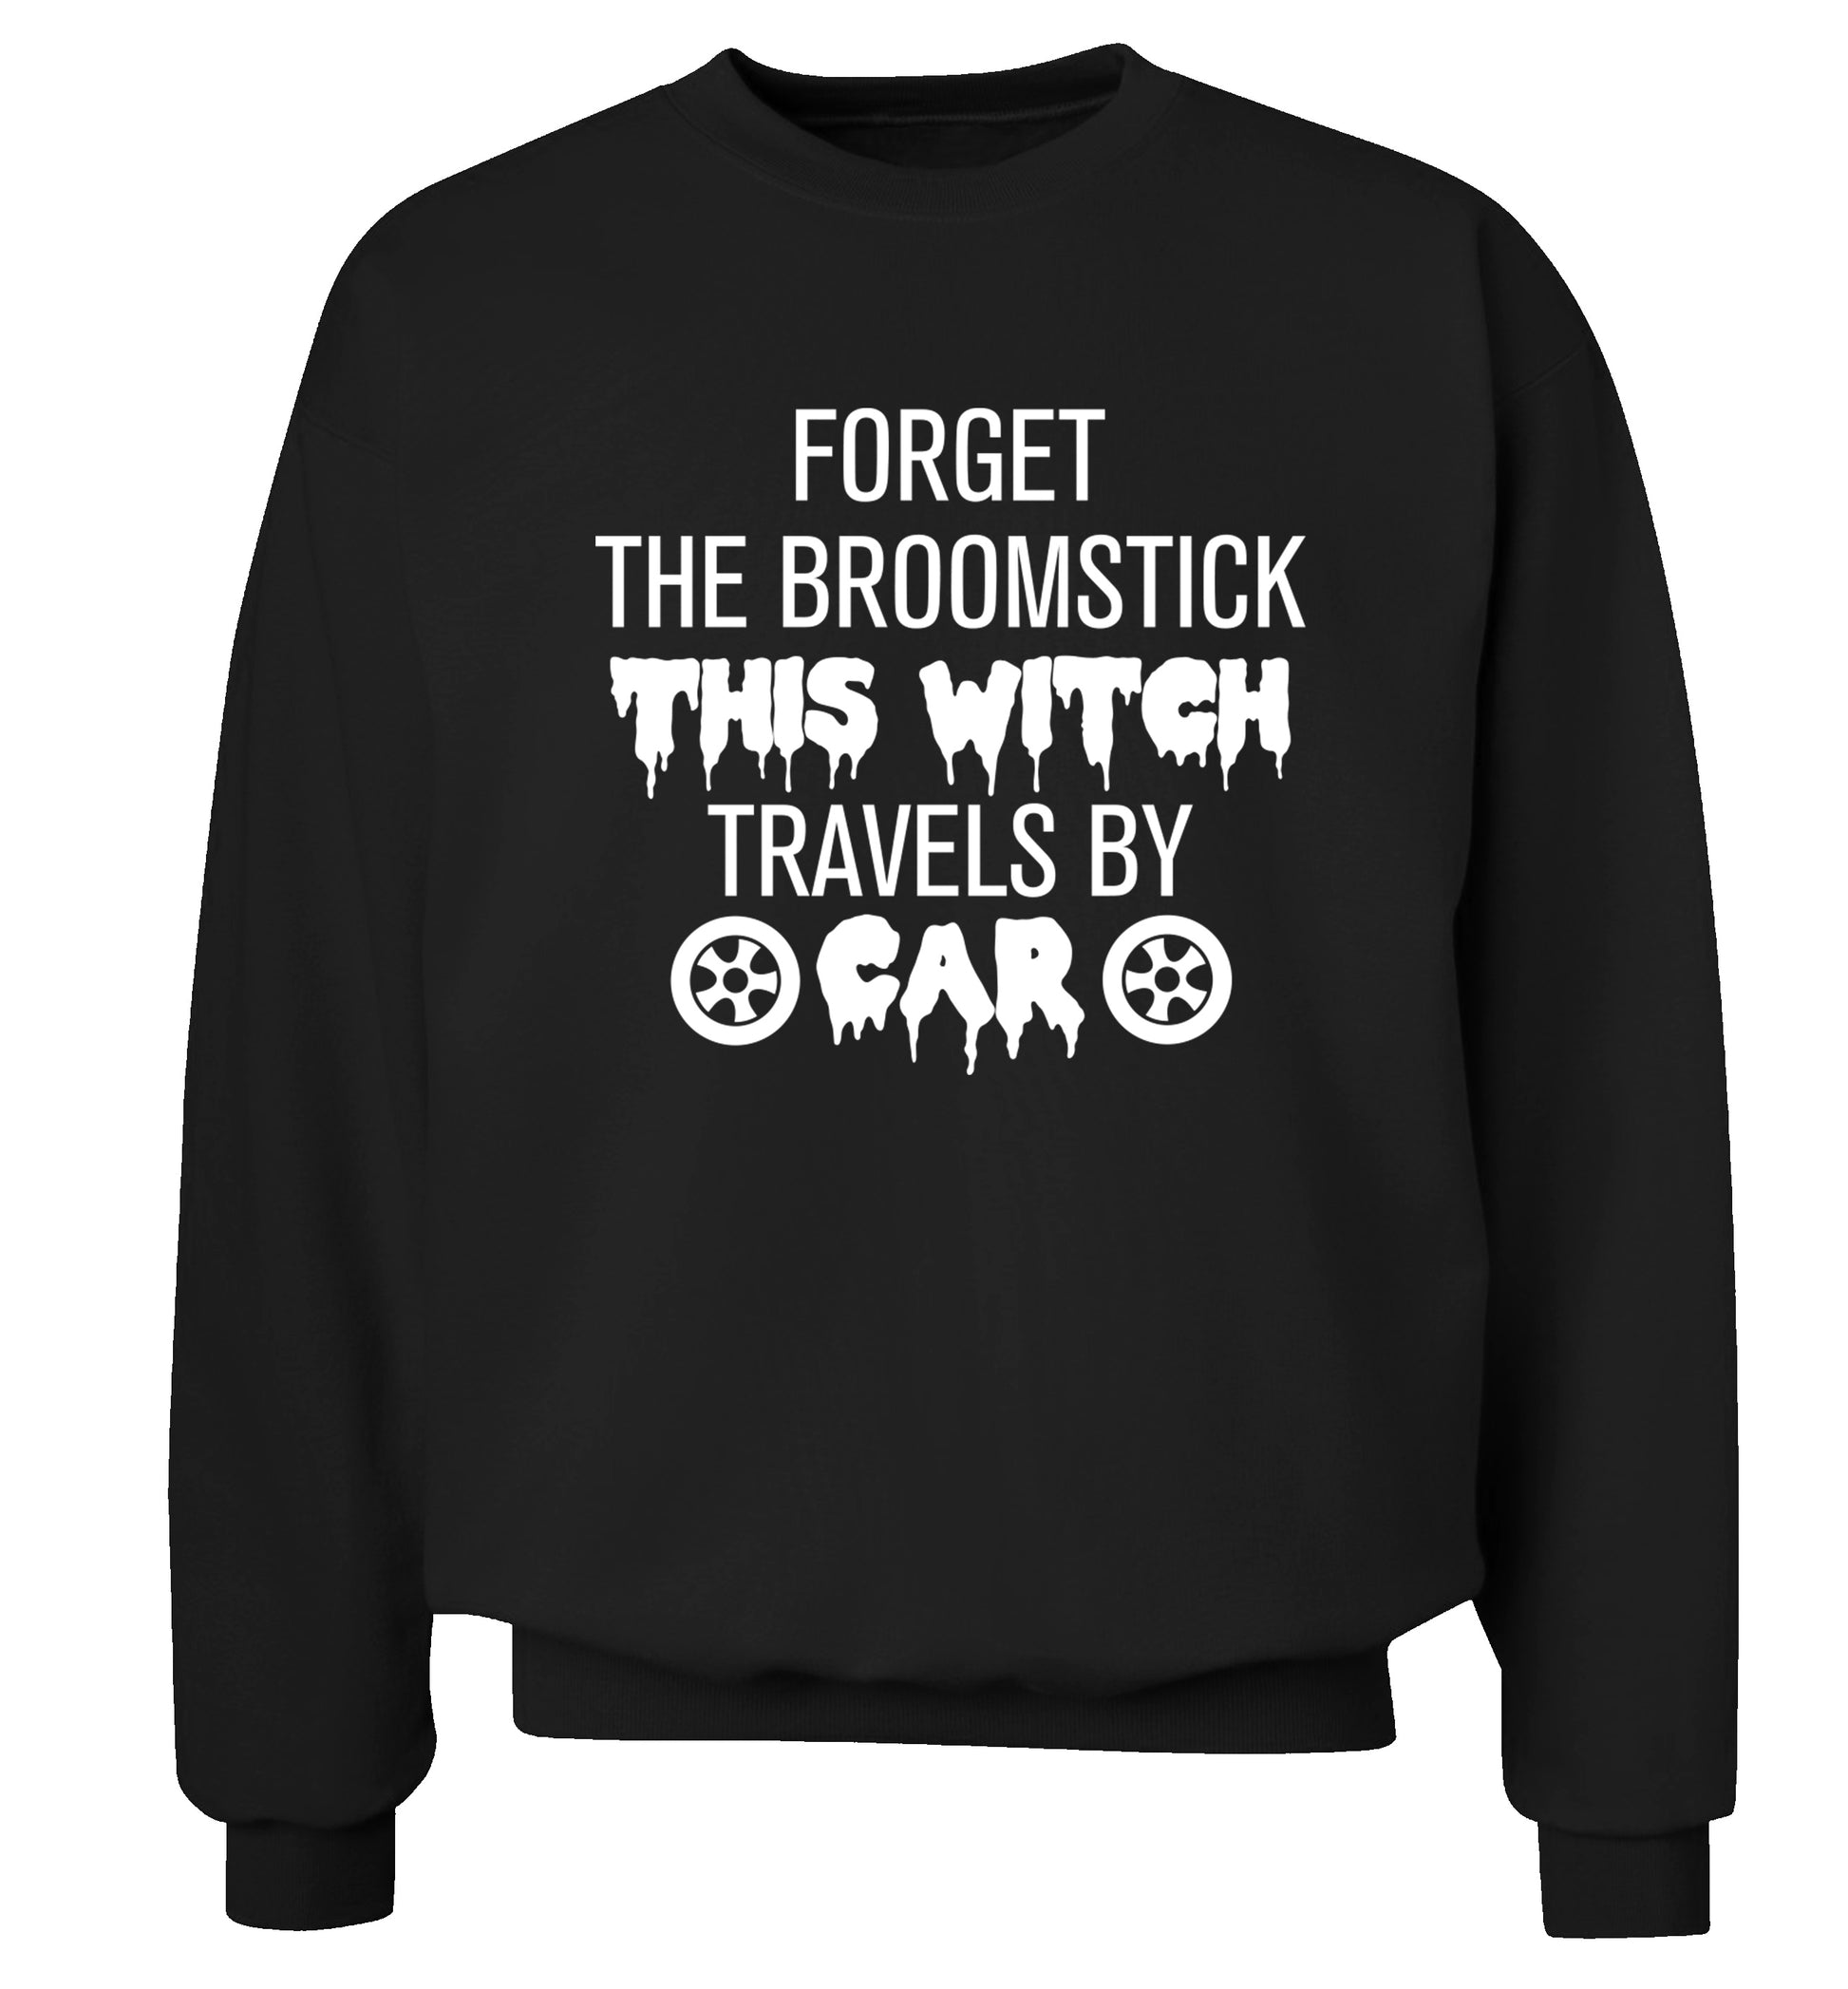 Forget the broomstick this witch travels by car Adult's unisexblack Sweater 2XL